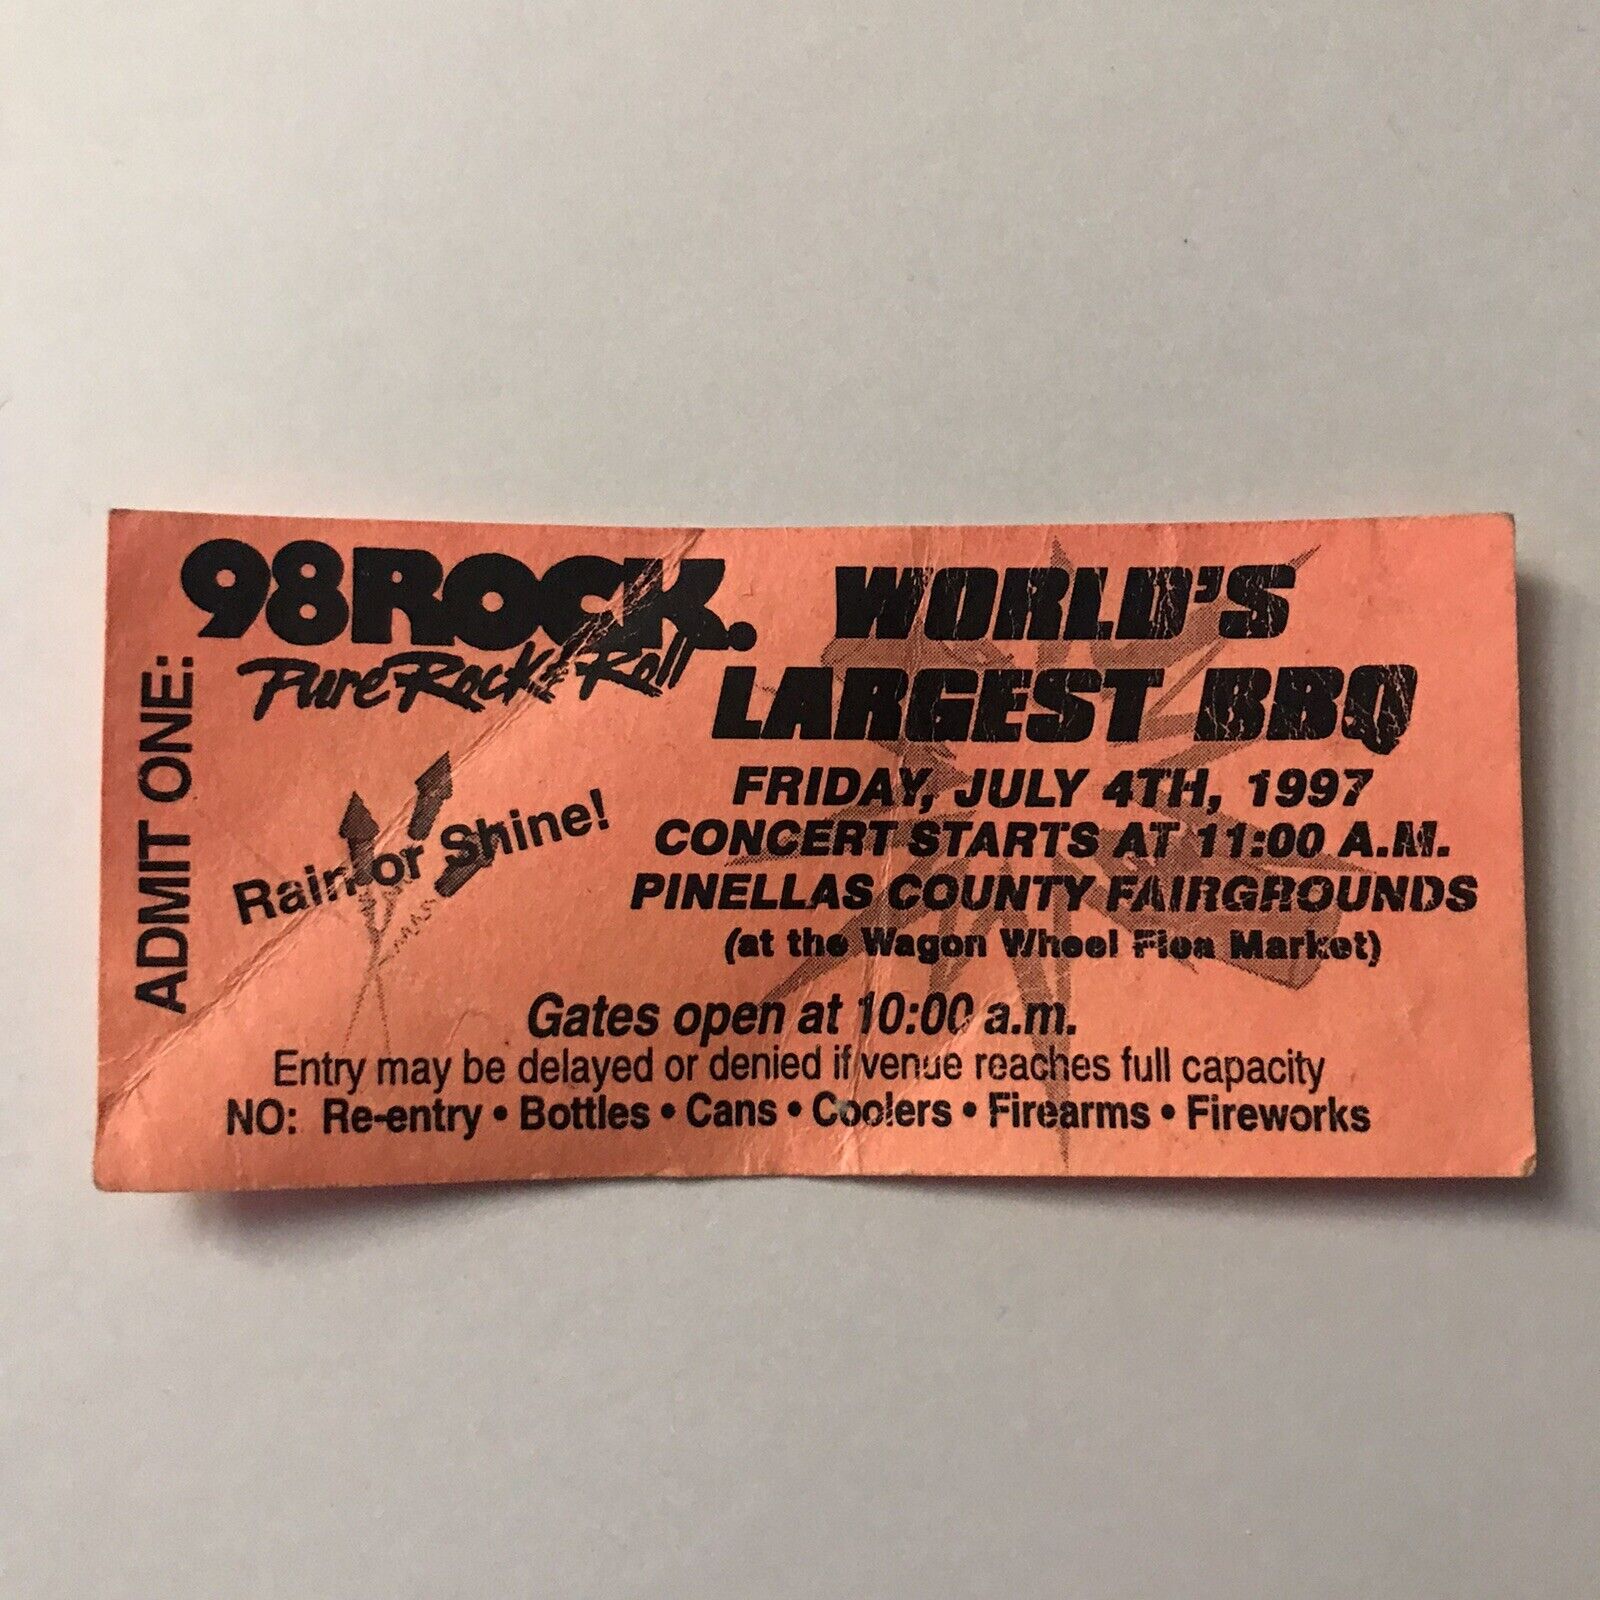 98 Rock Worlds Largest Bbq Faith No More Creed Concert Ticket Stub Vintage 1997